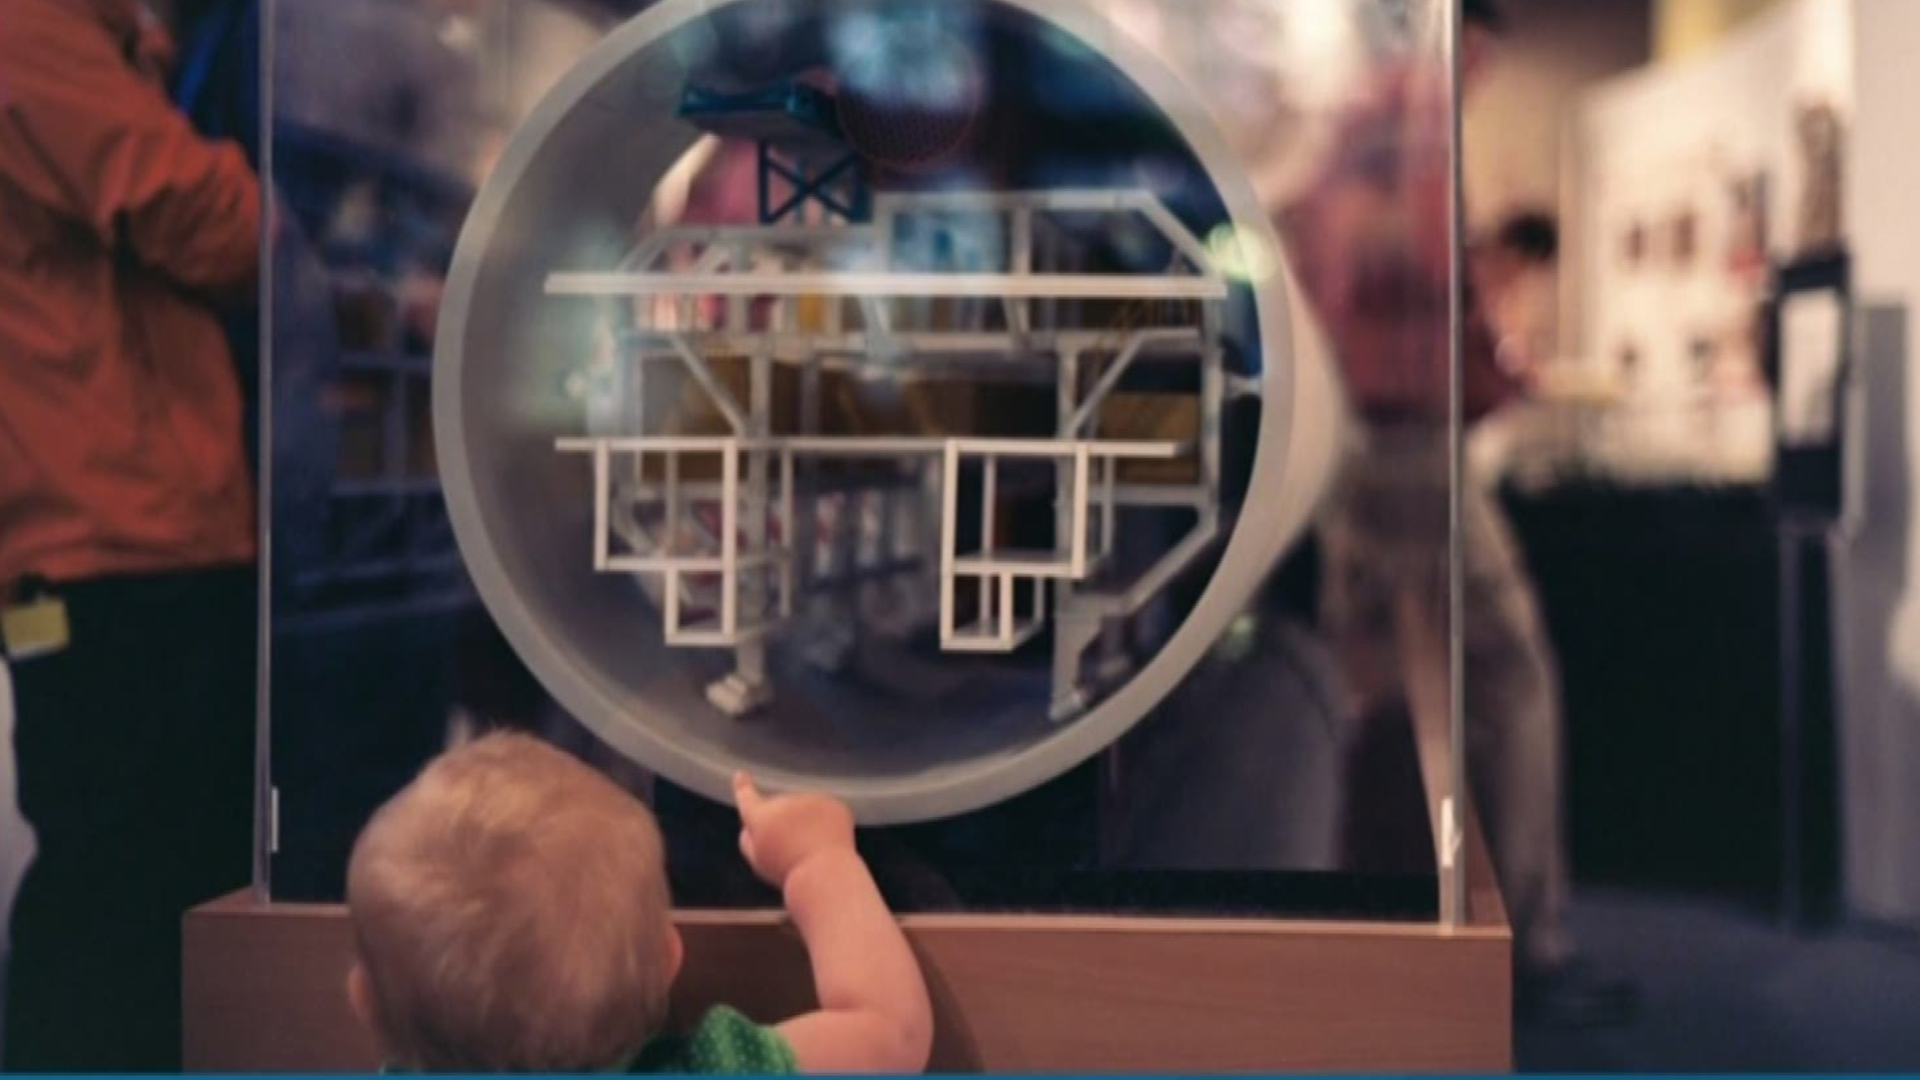 Seven-year-old Sally is sort of a living mile marker for the project. She was there, as a baby, when a baby model of Bertha the tunnel-boring machine was unveiled to the public in 2012.